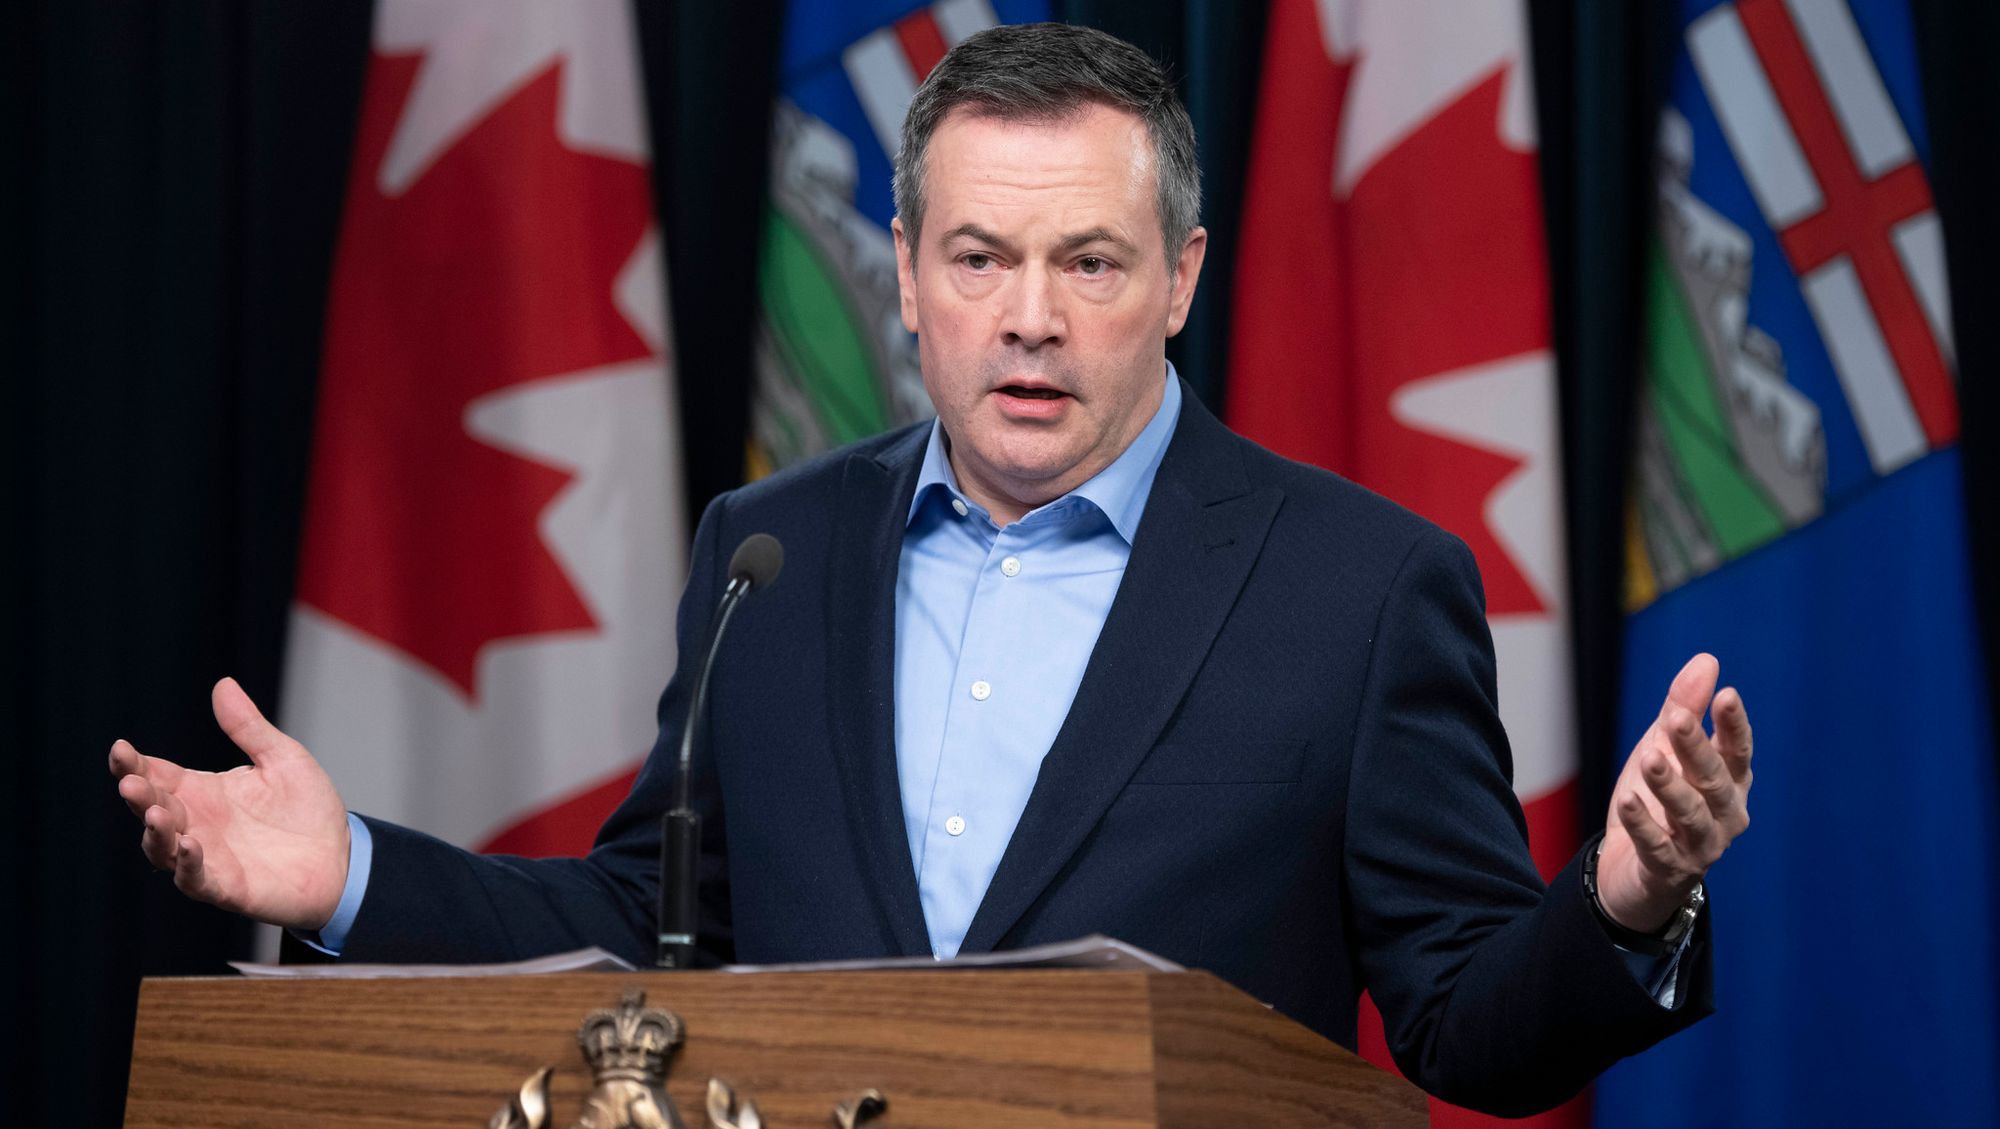 Jason Kenney Is Letting Drug Users Die To Prove He’s Conservative